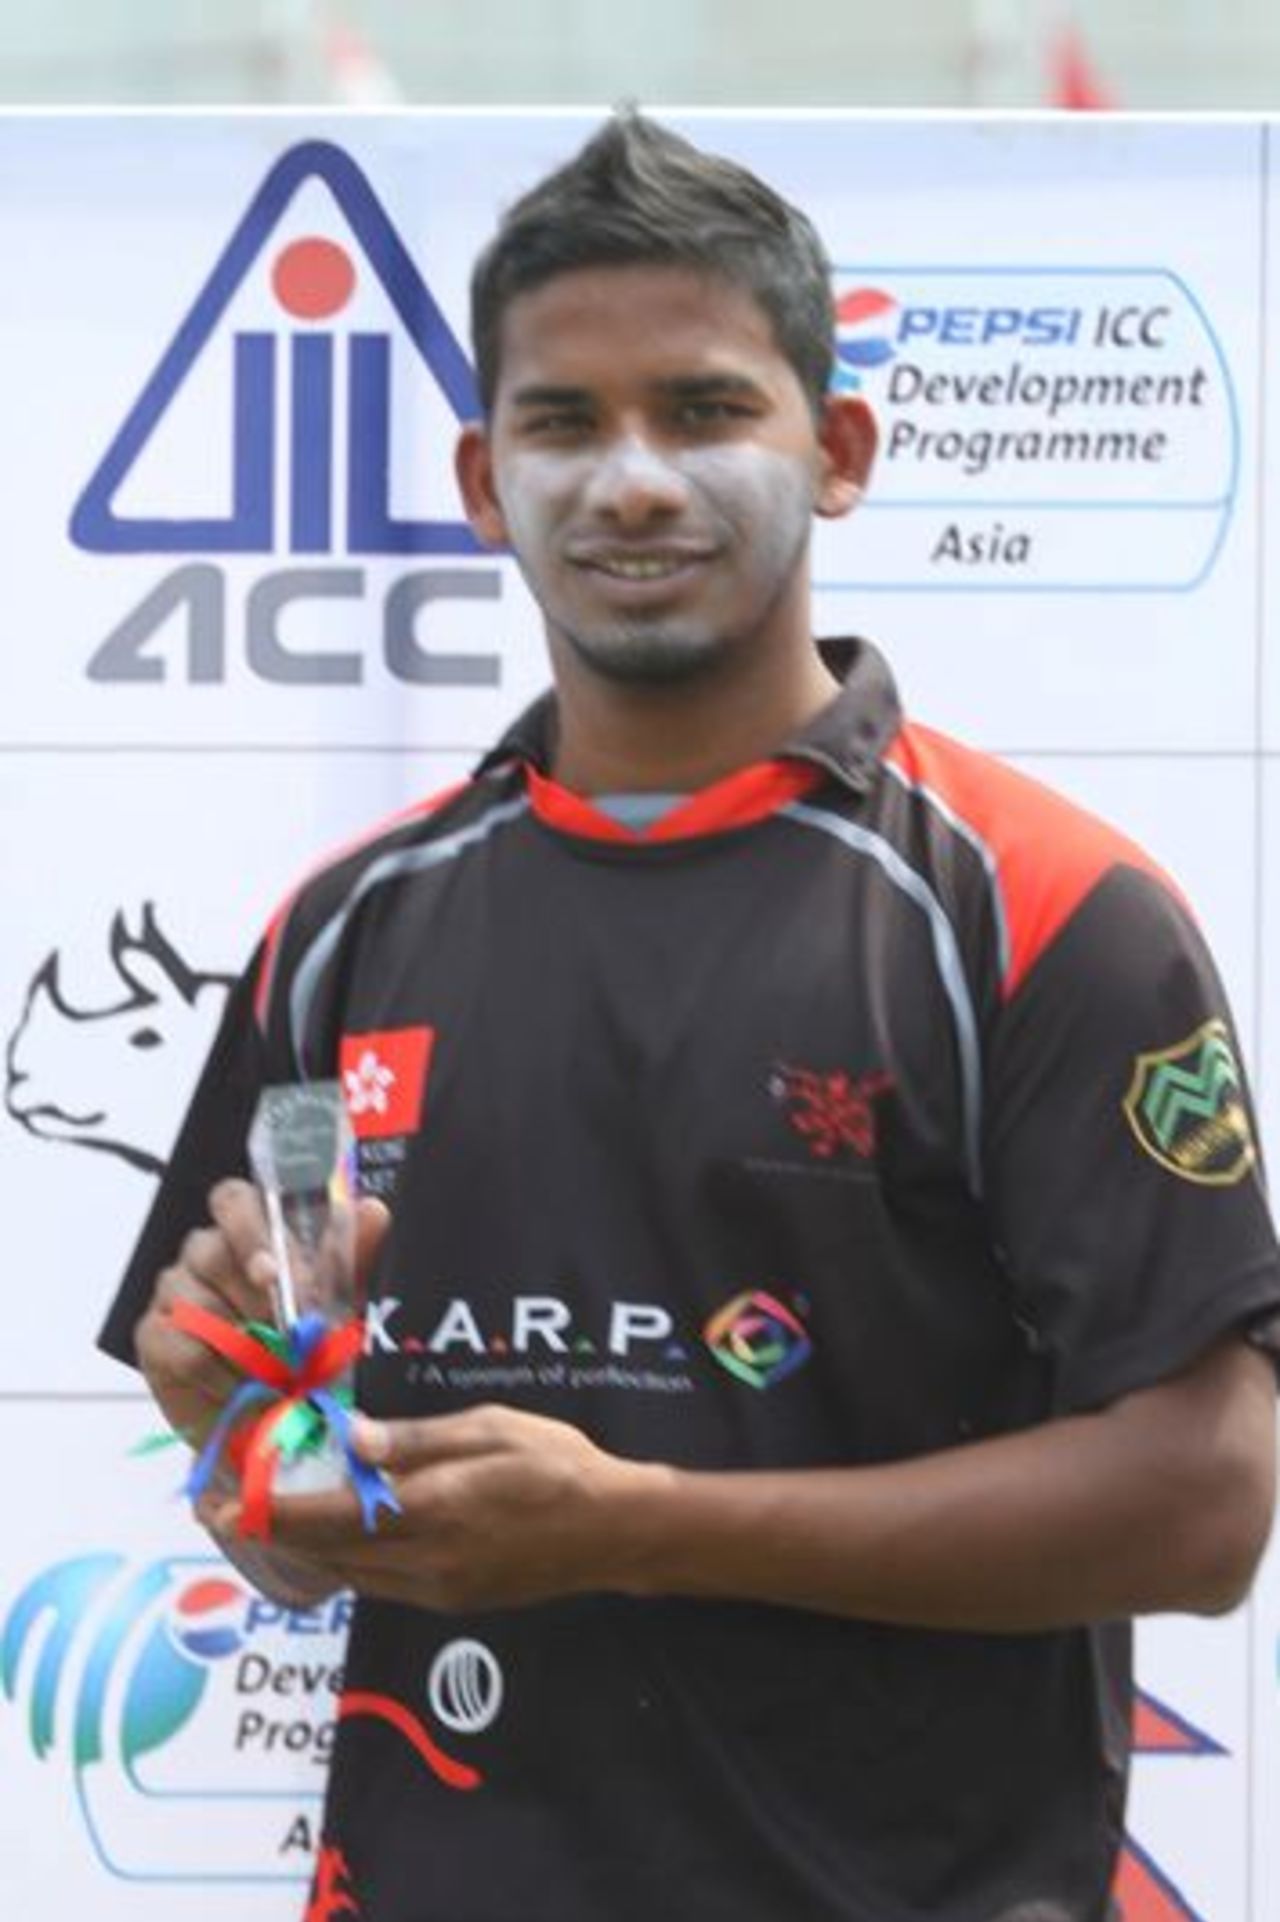 Nadeem Ahmed shows off his Man of the Match Award for taking 3-18 against Nepal at the ACC Twenty20 Cup 2013 in Kathmandu